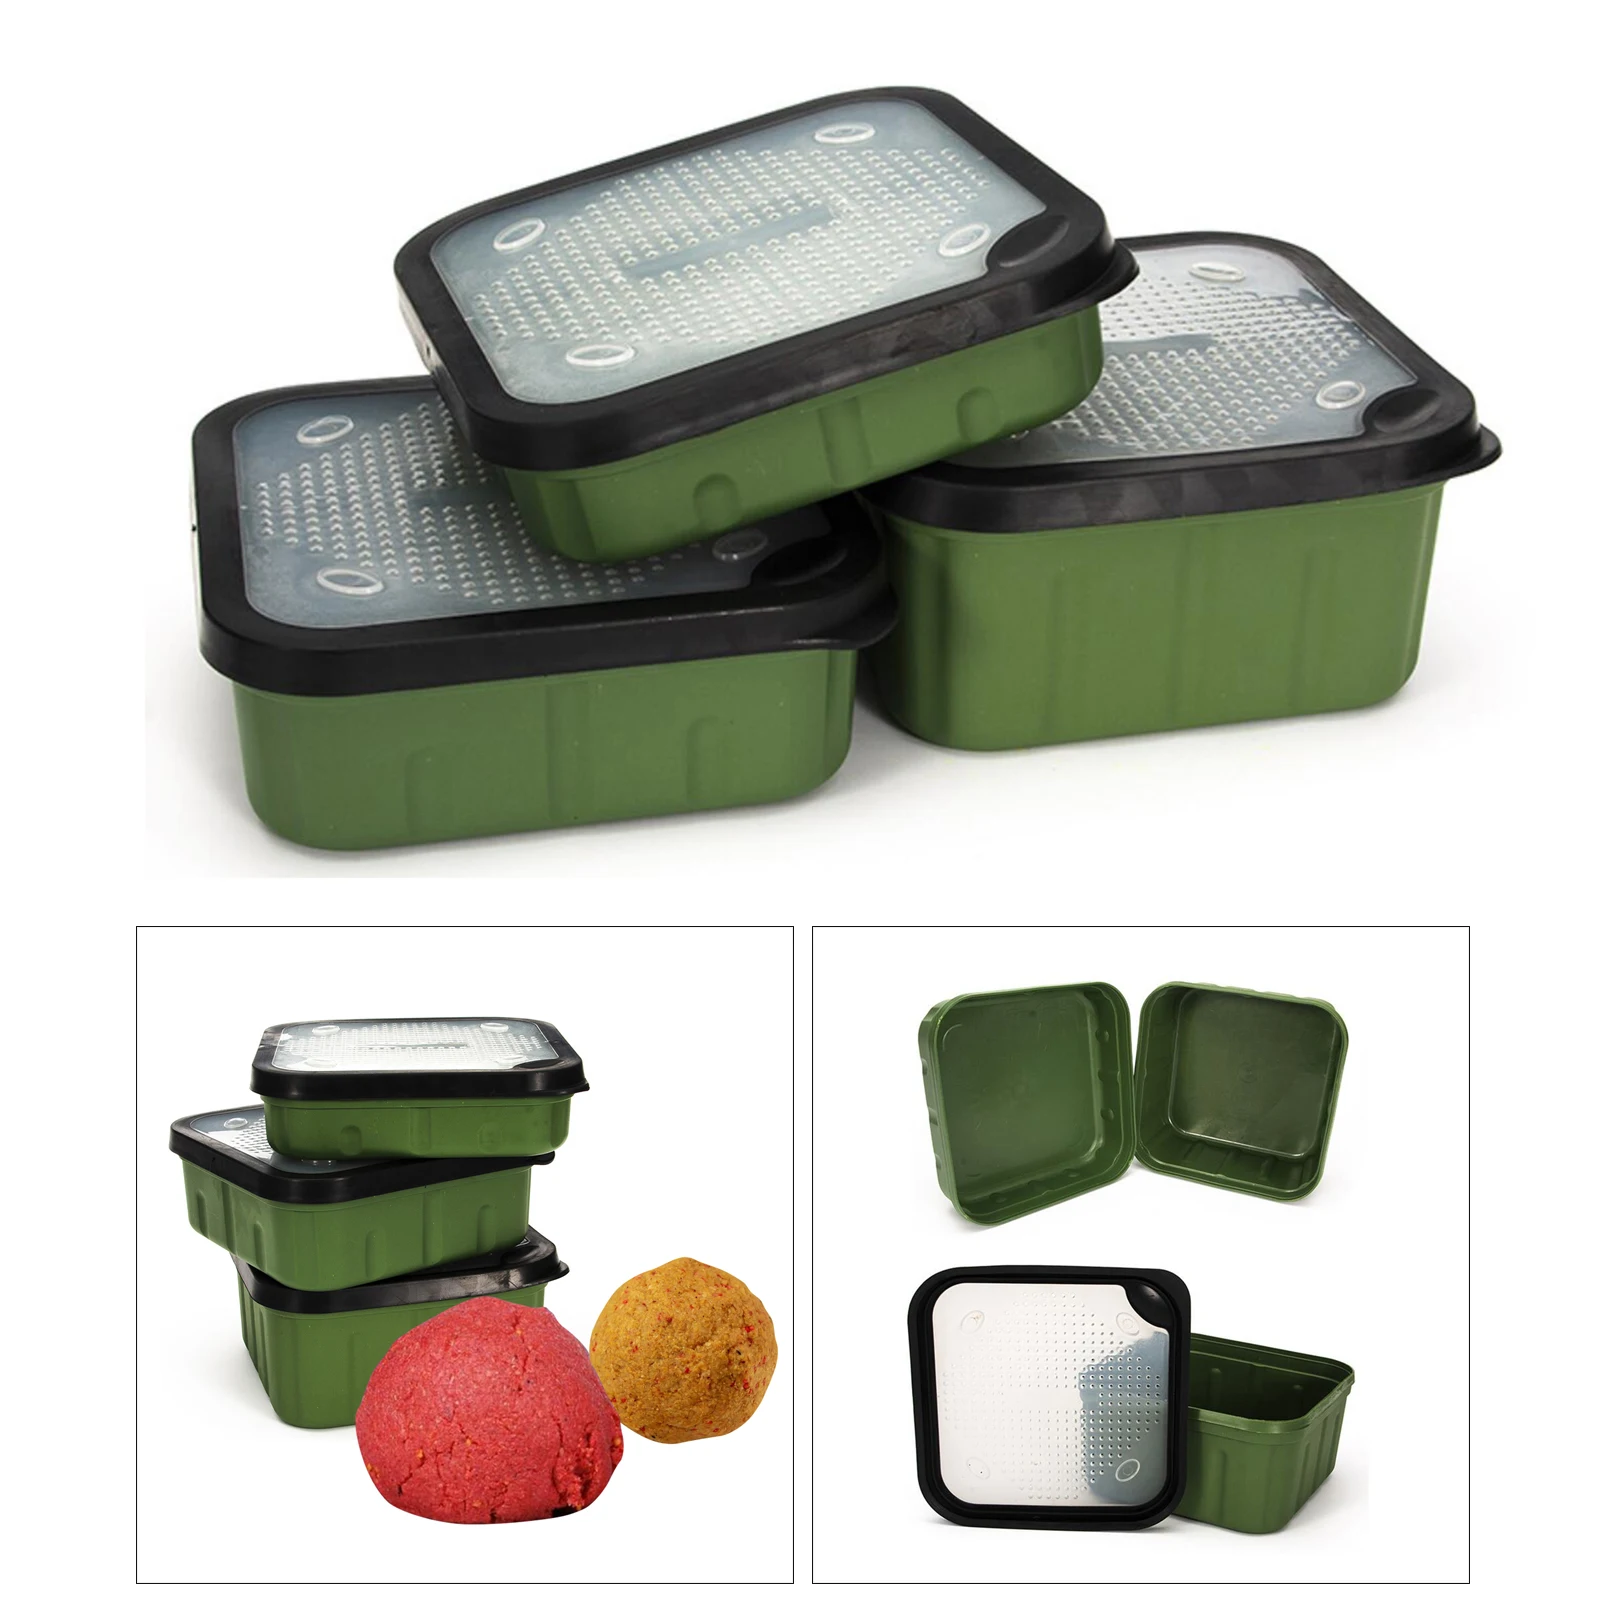 Carp Fishing Bait Boxes Maggot Boxes with Breathable Fitting Lids Shatterproof Fishing Tackle